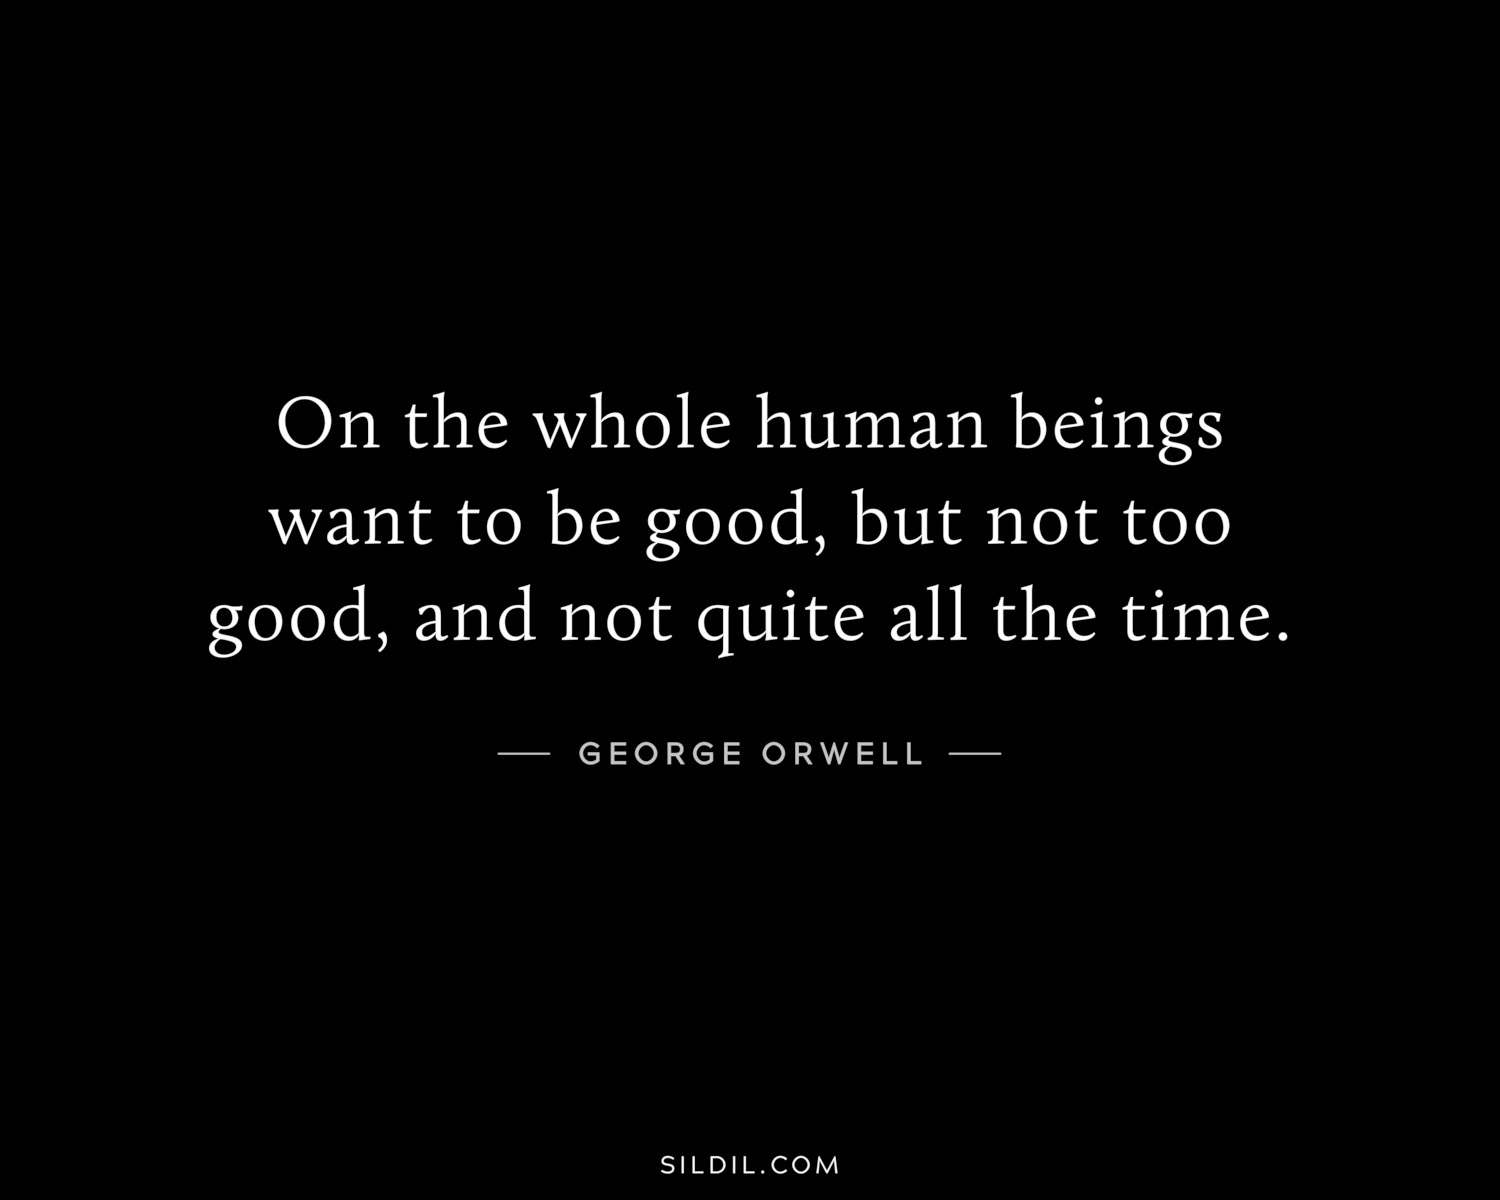 On the whole human beings want to be good, but not too good, and not quite all the time.